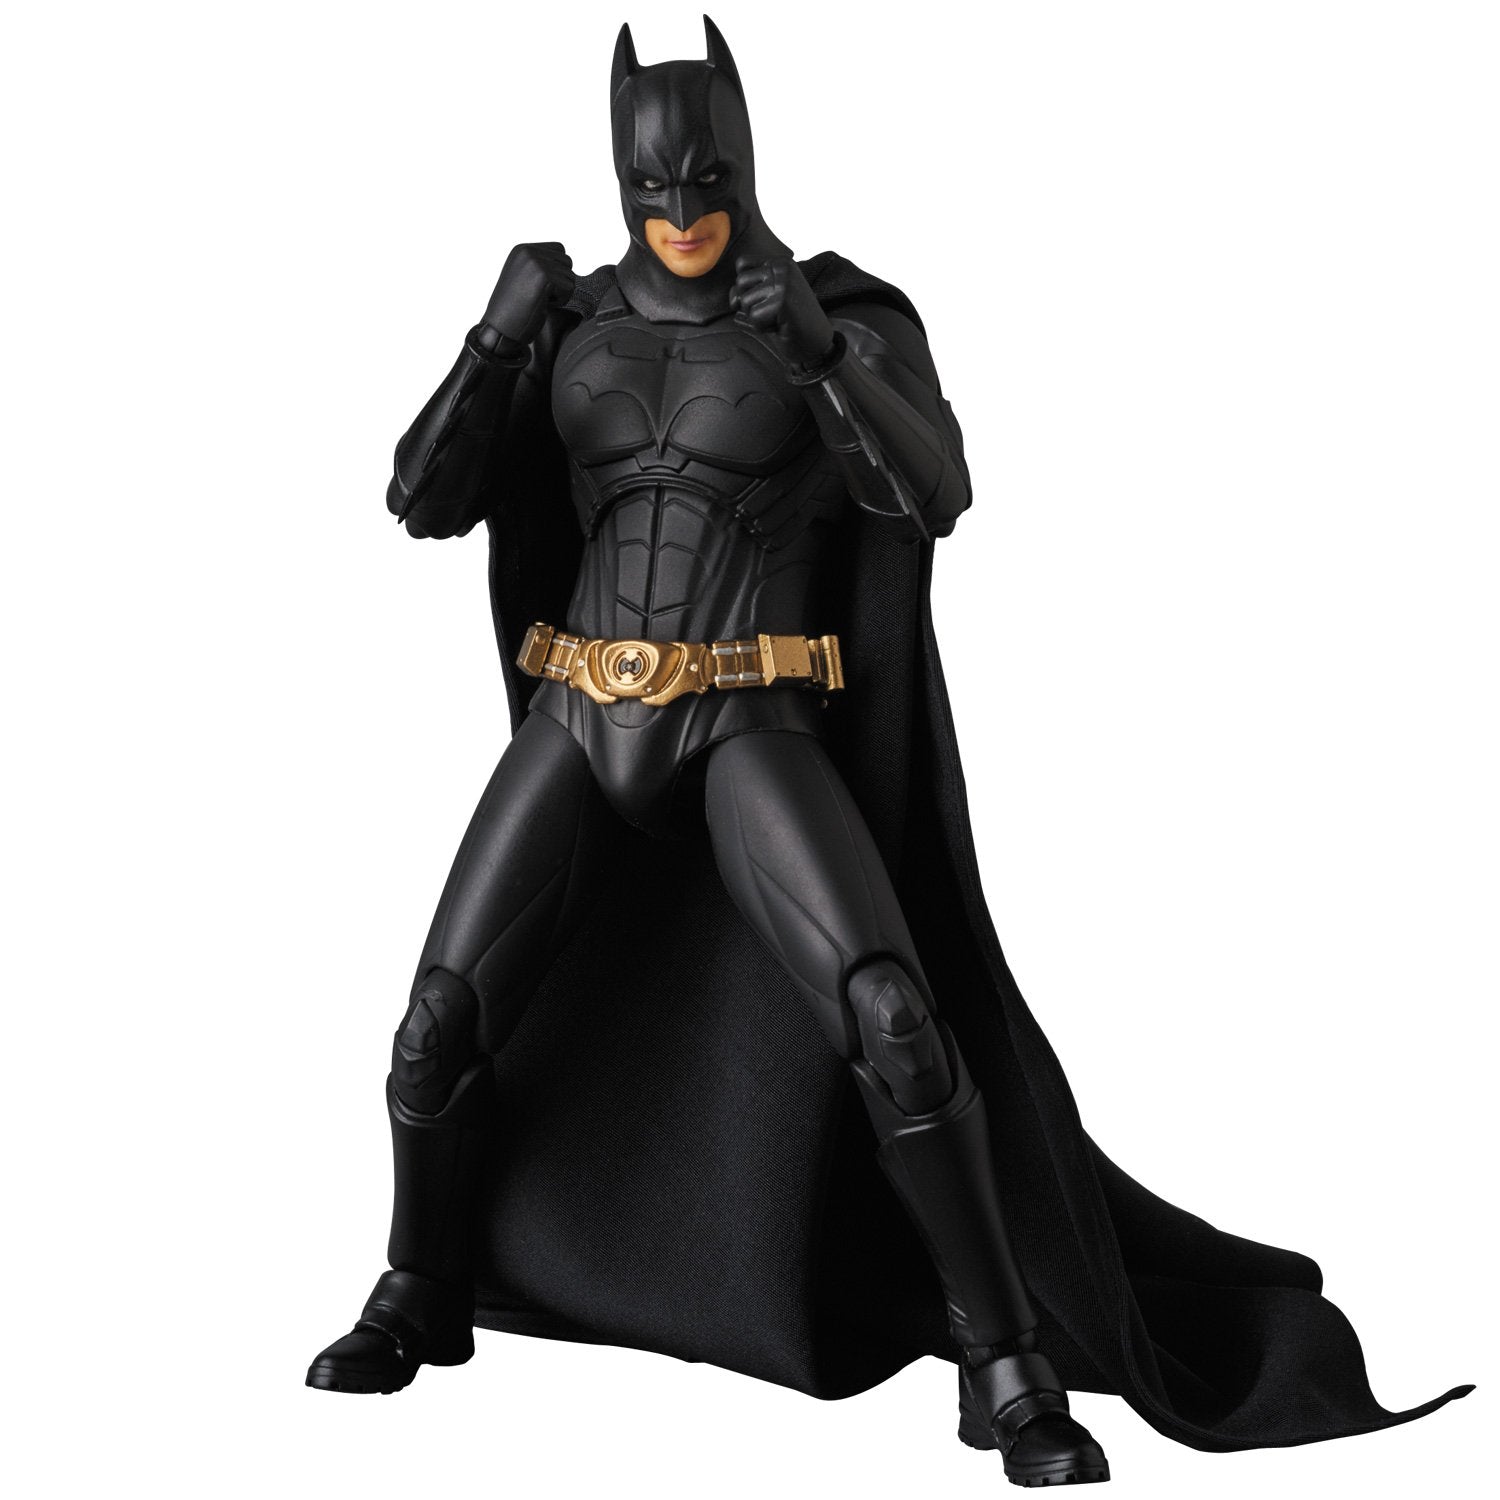 BATMAN Exclusive Sixth Scale Figure By Hot Toys